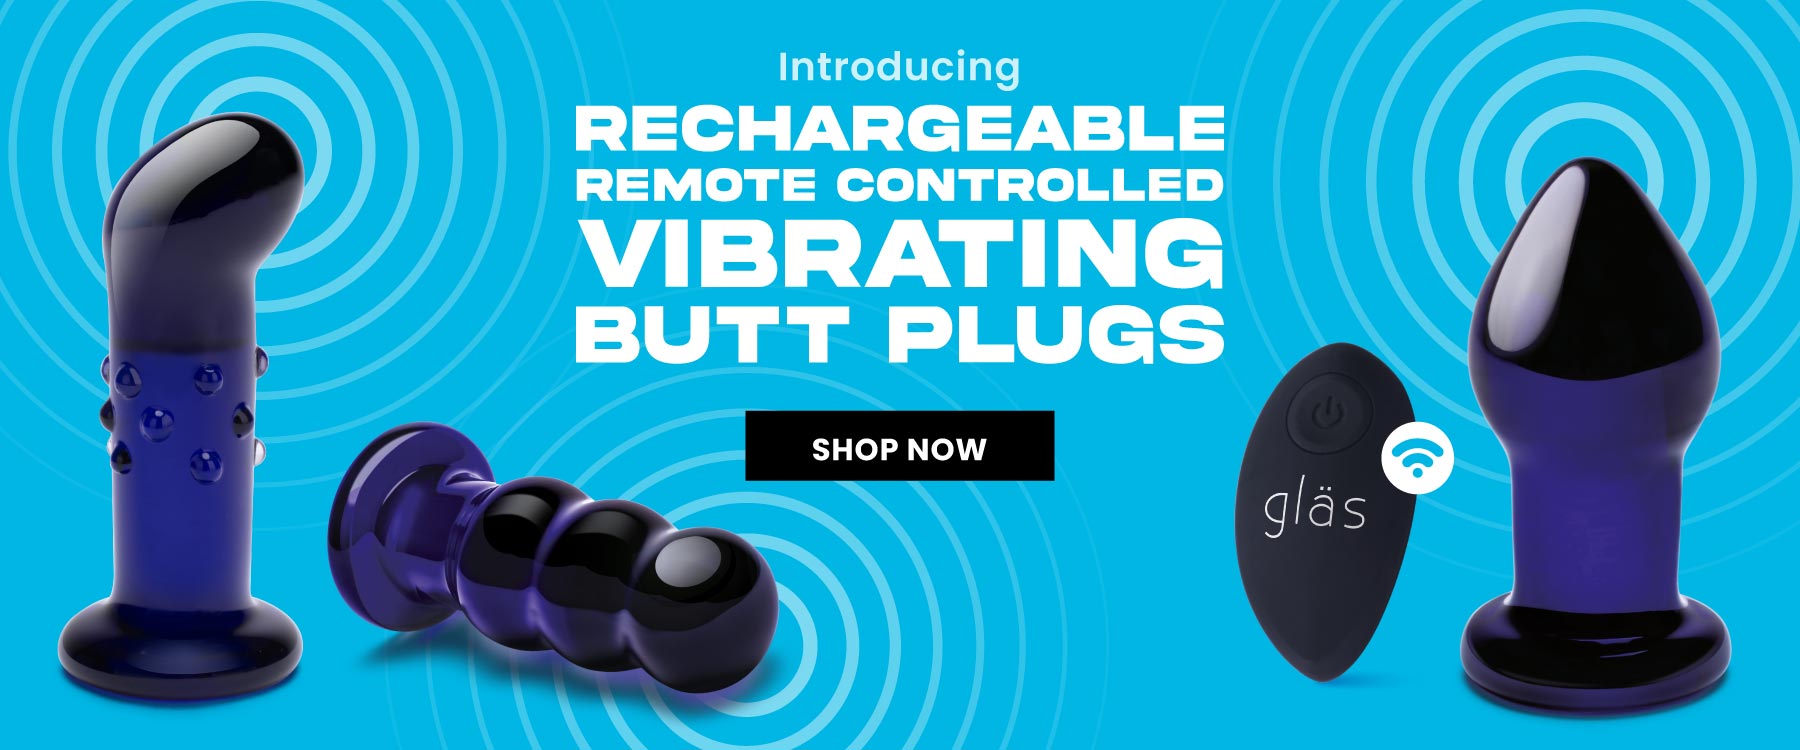 Gläs - Introducing Rechargeable Remote Controlled Vibrating Glass Butt Plugs 